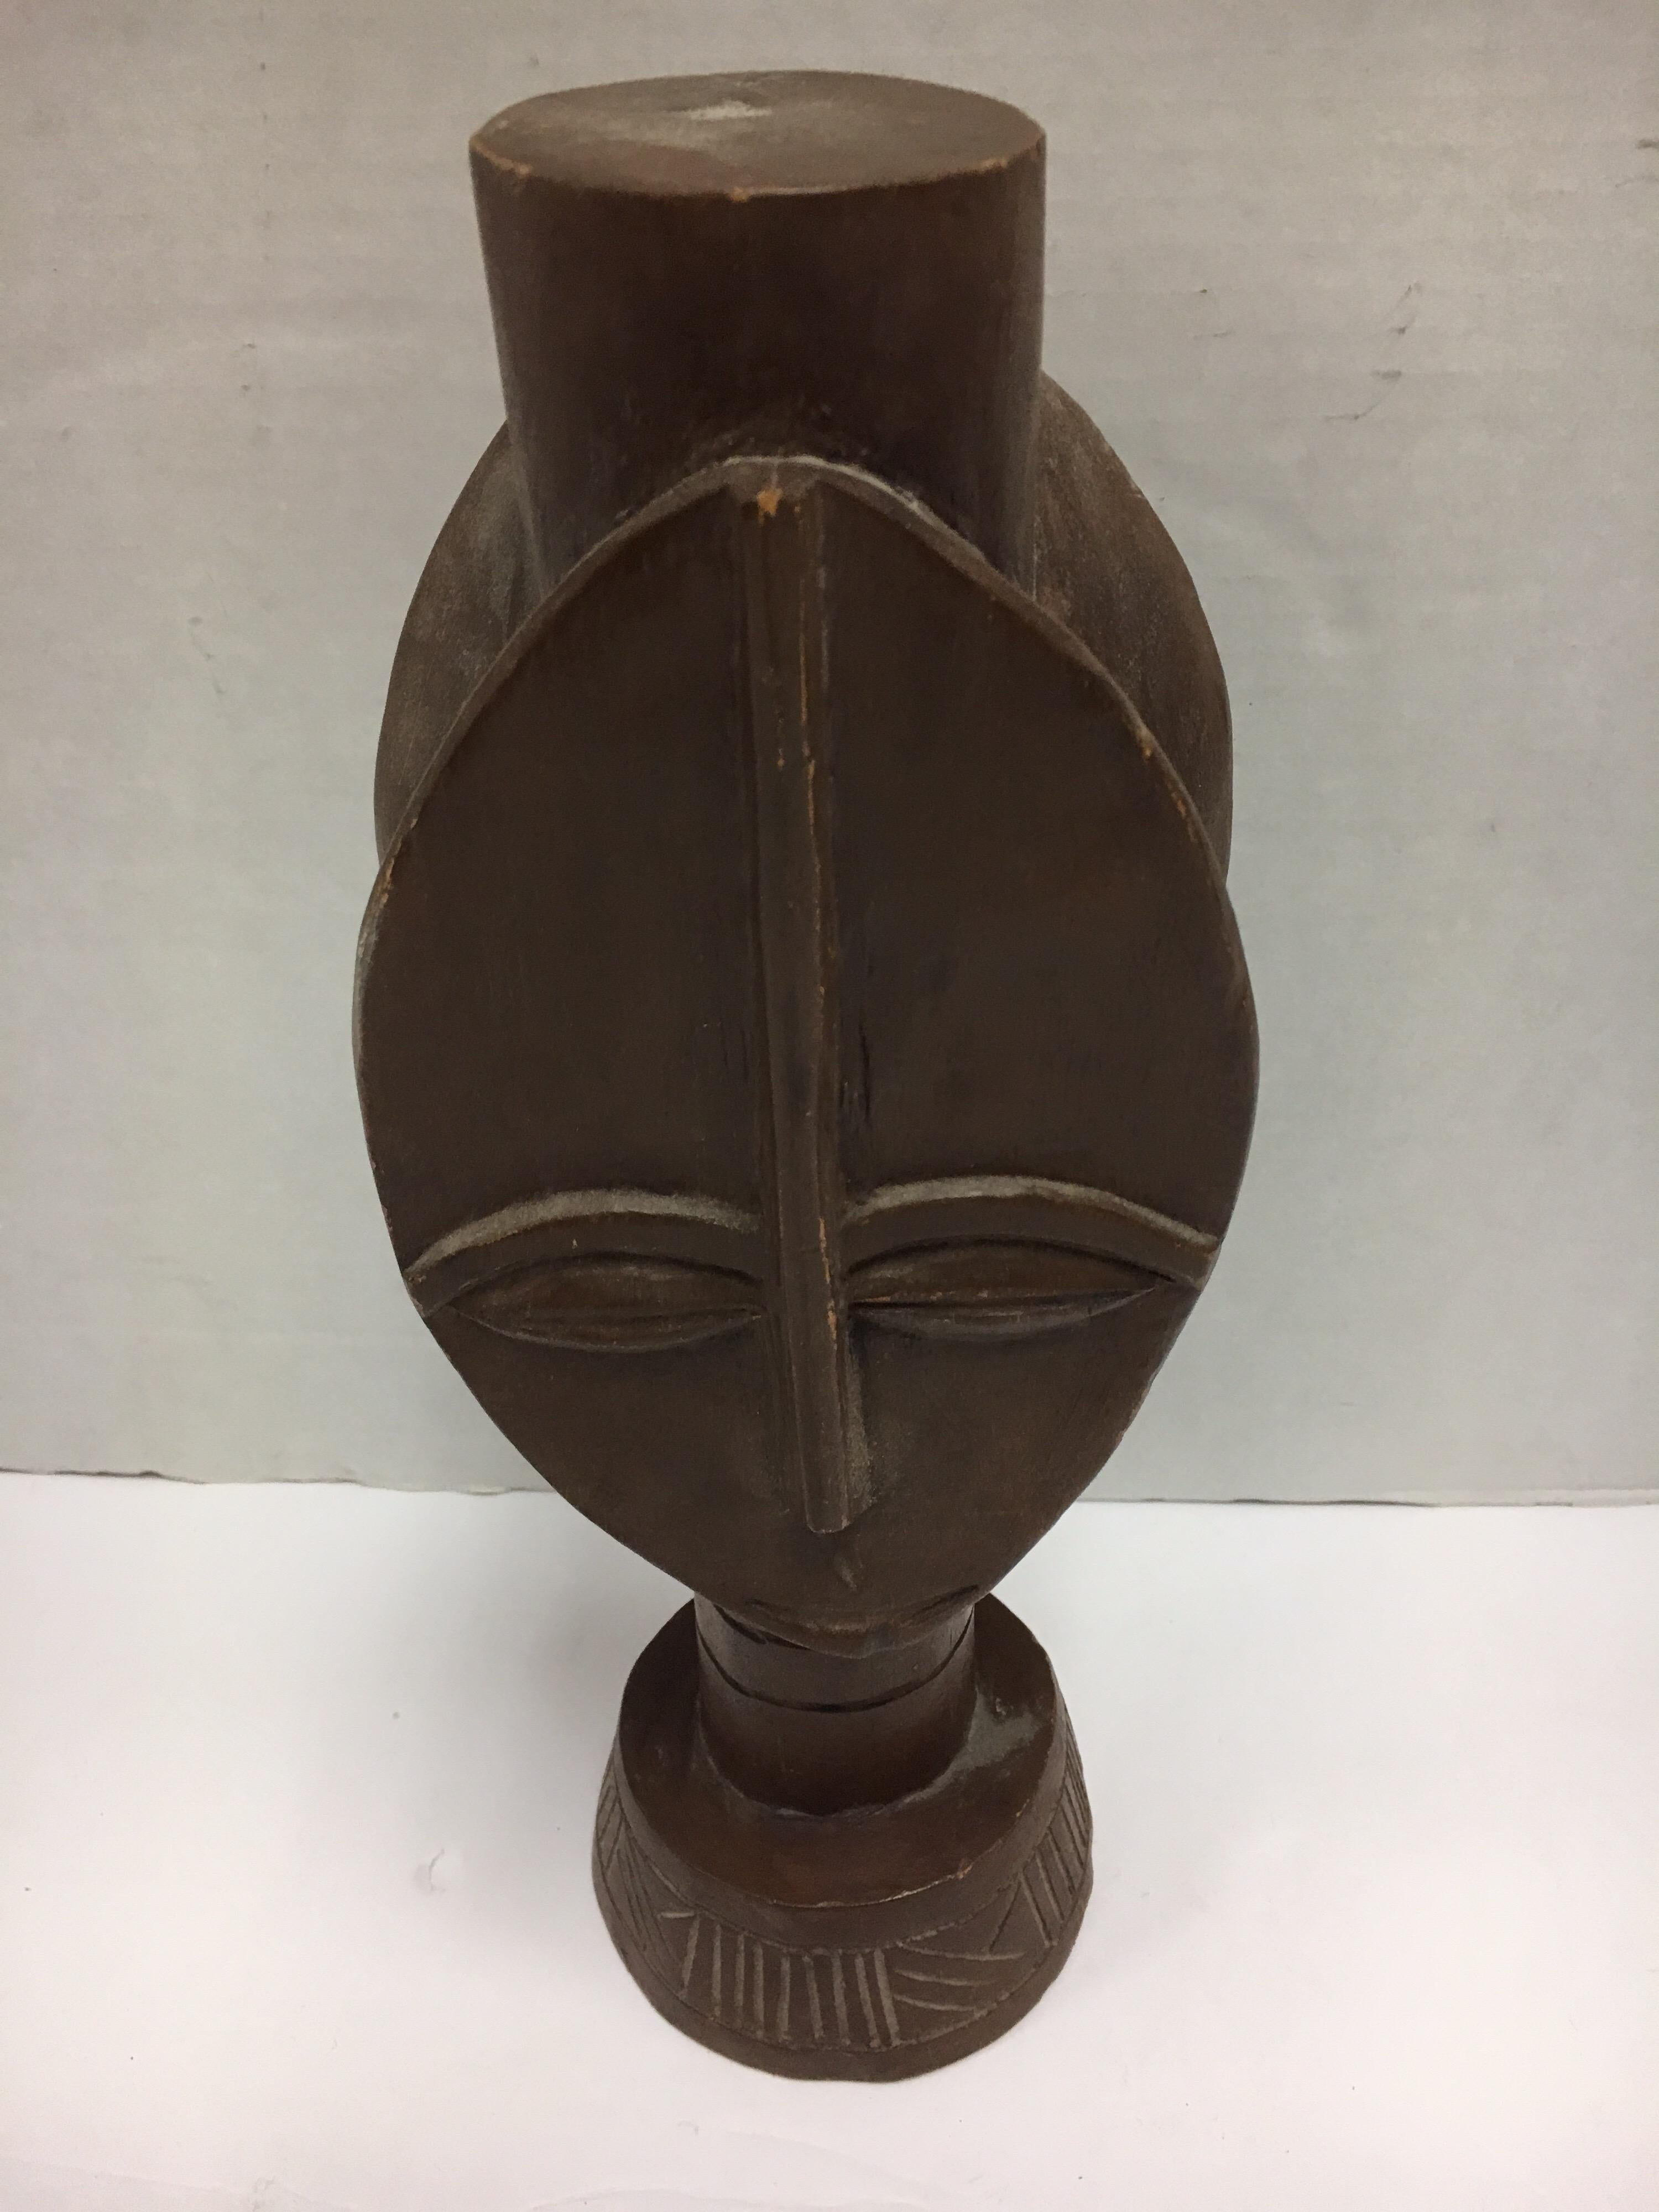 Coveted decorative African hand carved wood sculpture with graphic elements, circa 1960s
This is a decorative item from the 1960s, it was made for export, it is not an antique tribal sculpture.
It was made by a master carver from a single piece of